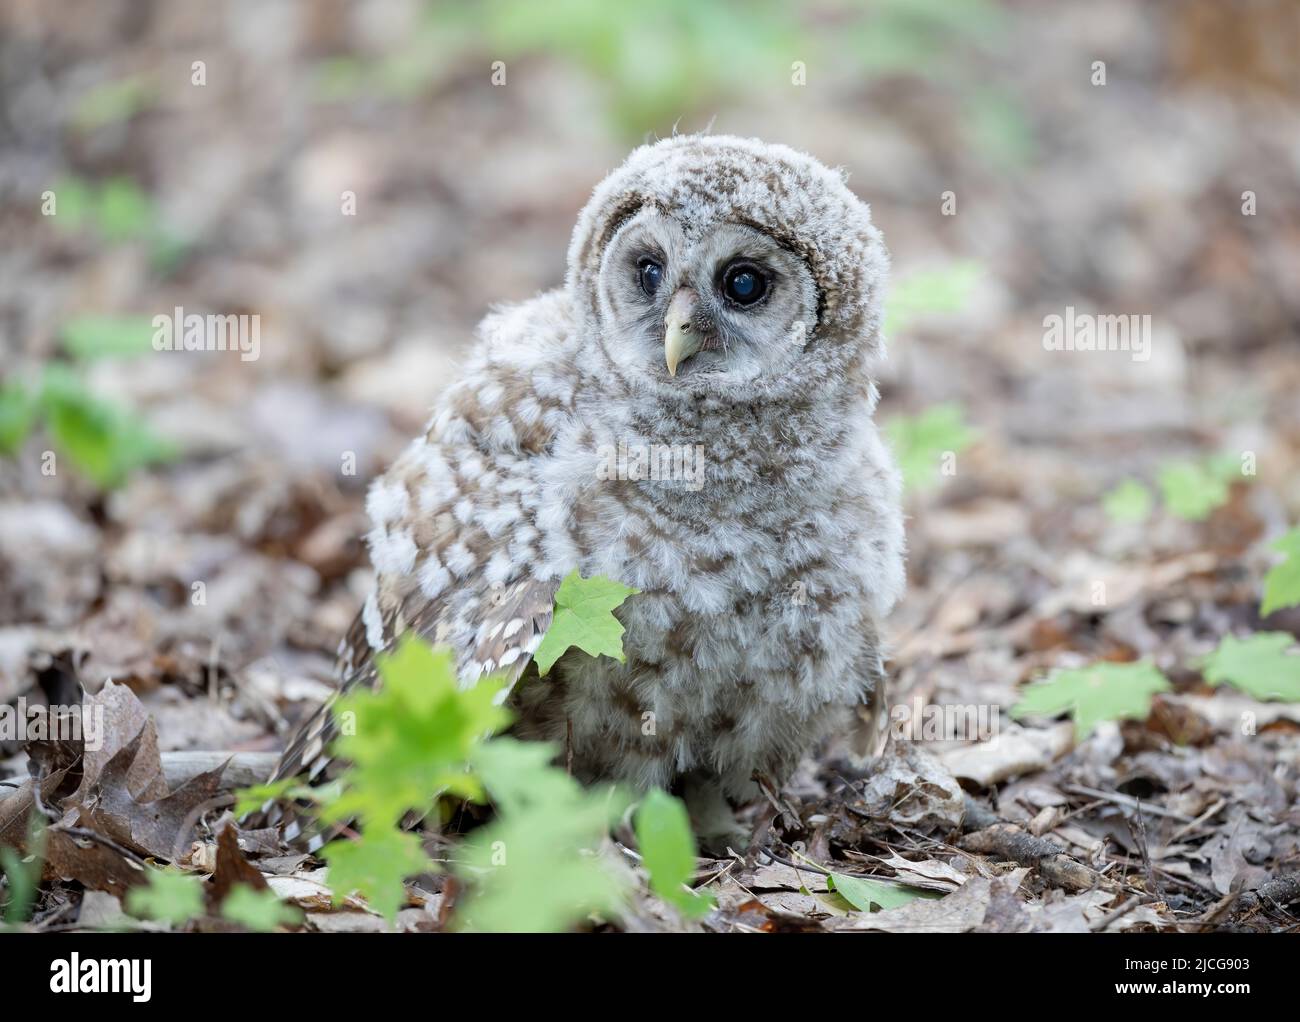 Barred owl owlet just fell out of a tree and now resting on the forest floor in Canada Stock Photo